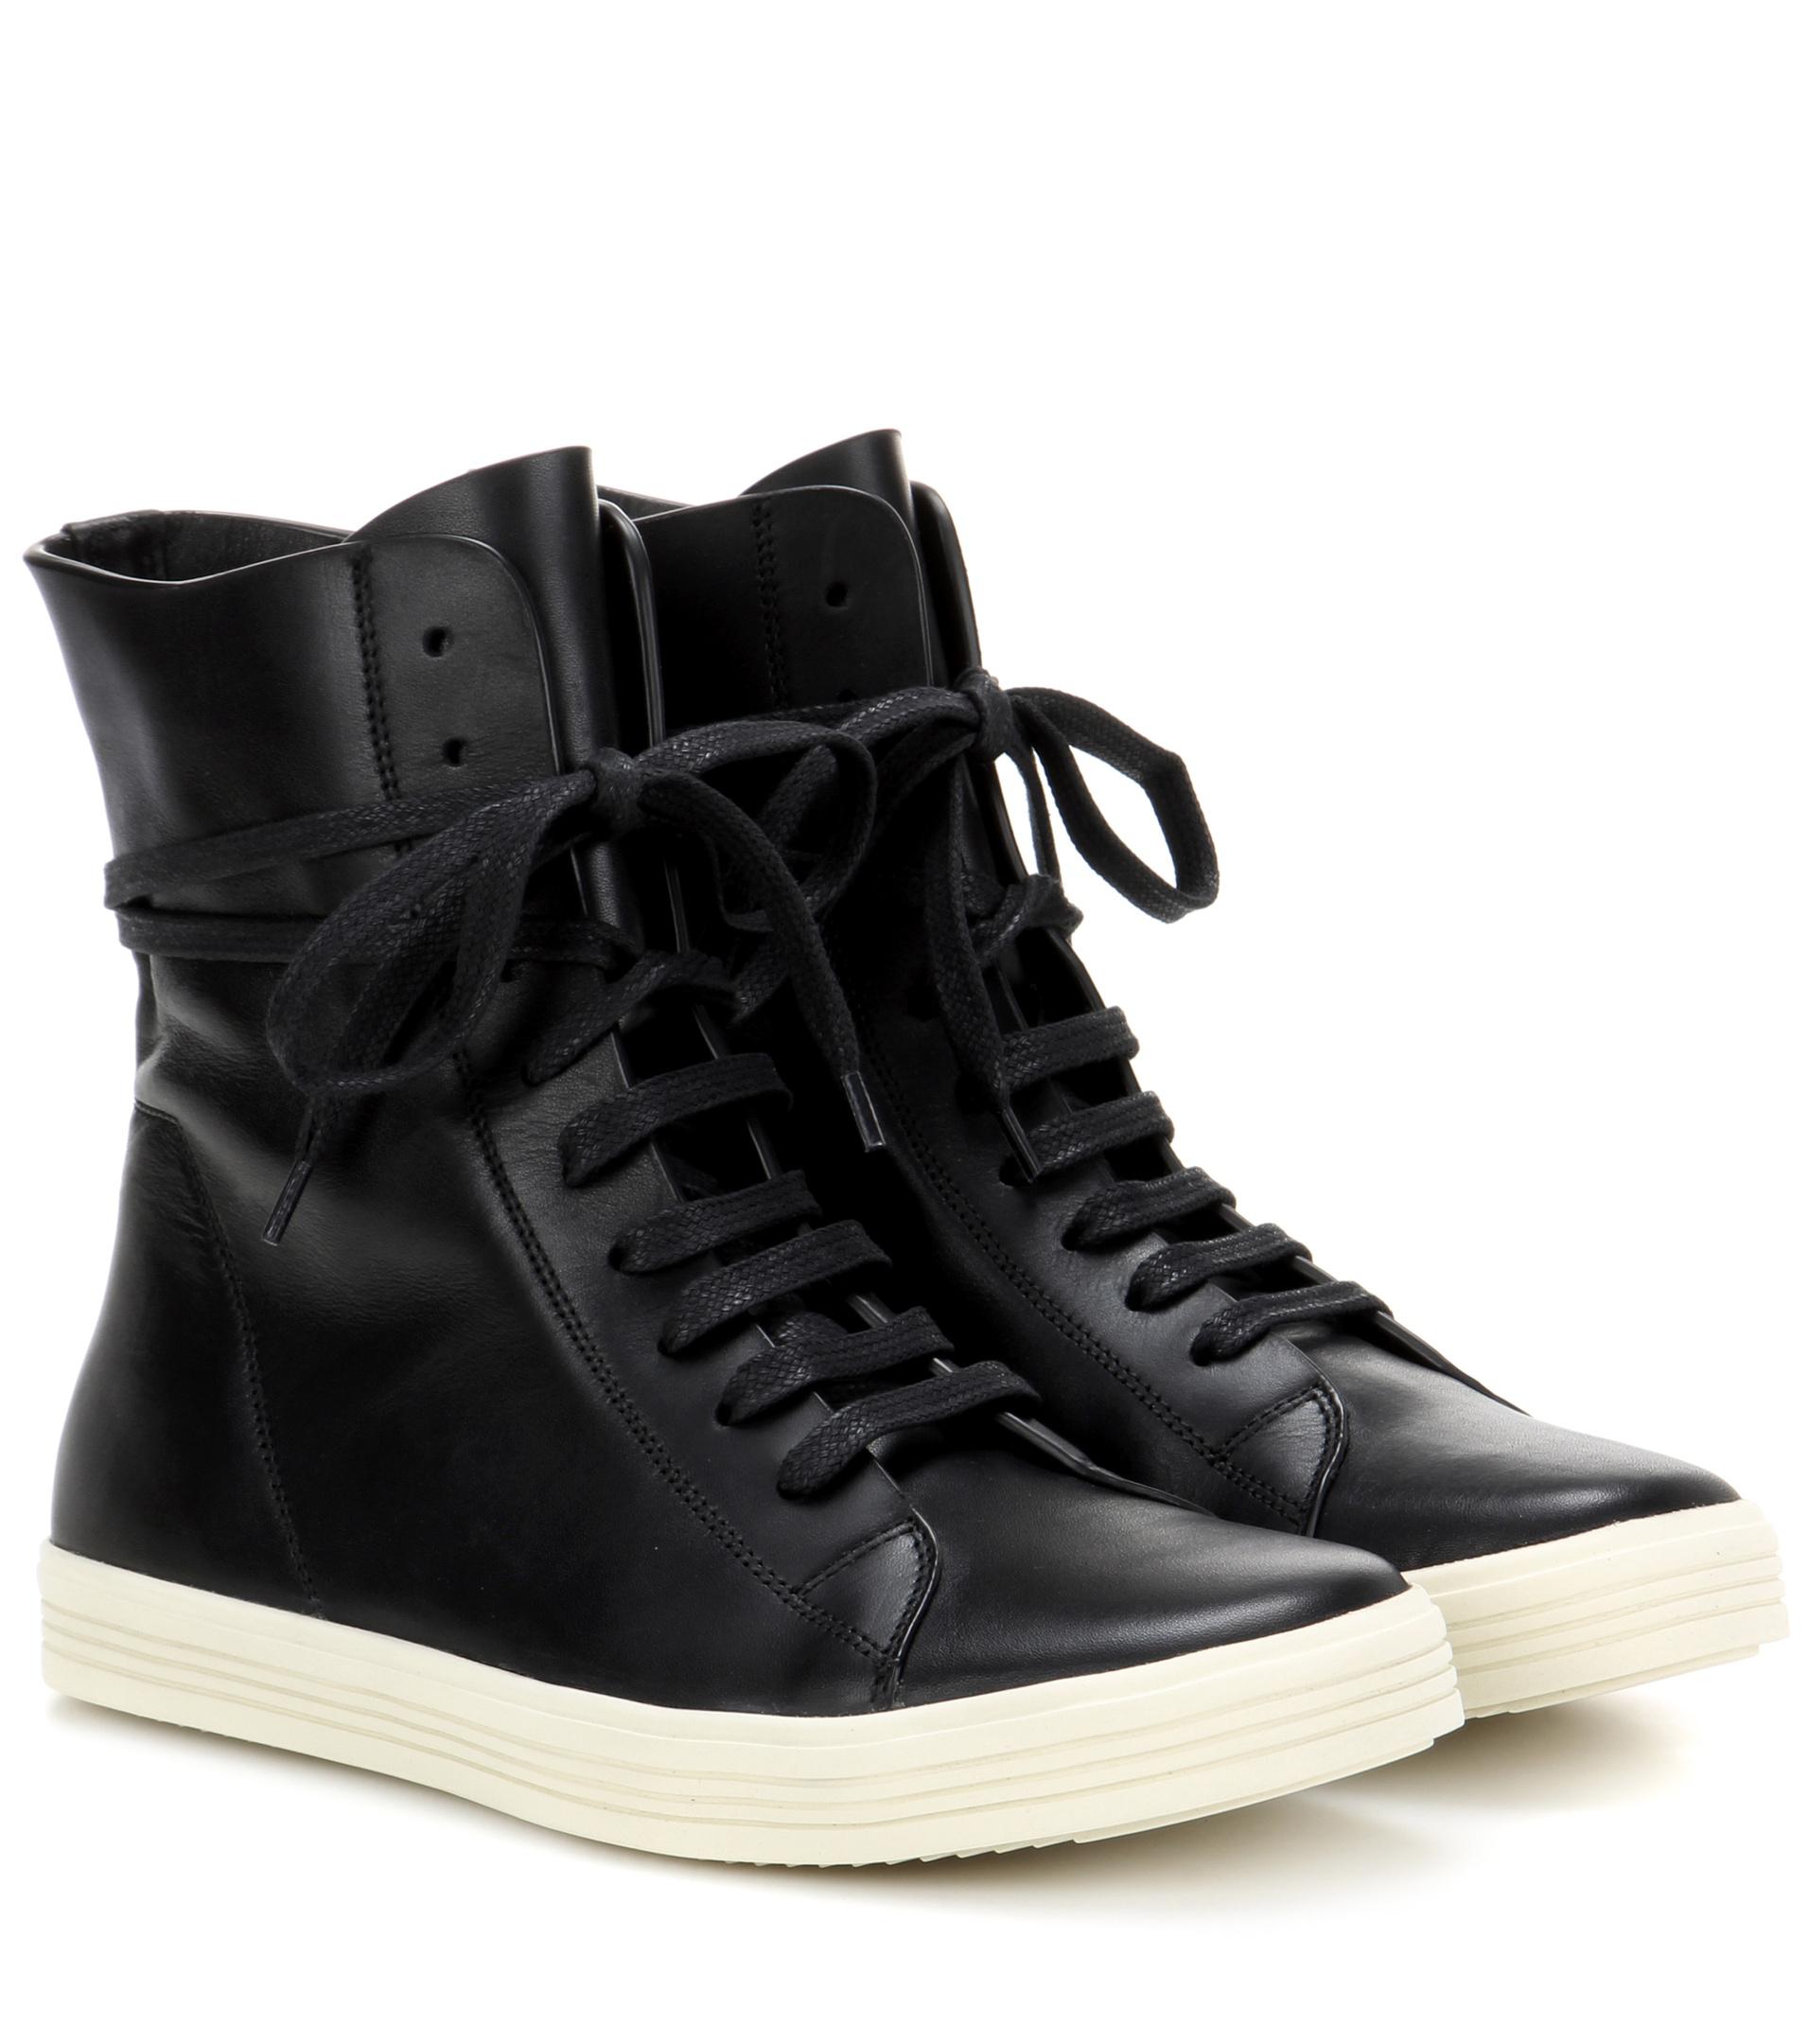 Rick Owens Leather High-top Sneakers in Black - Lyst